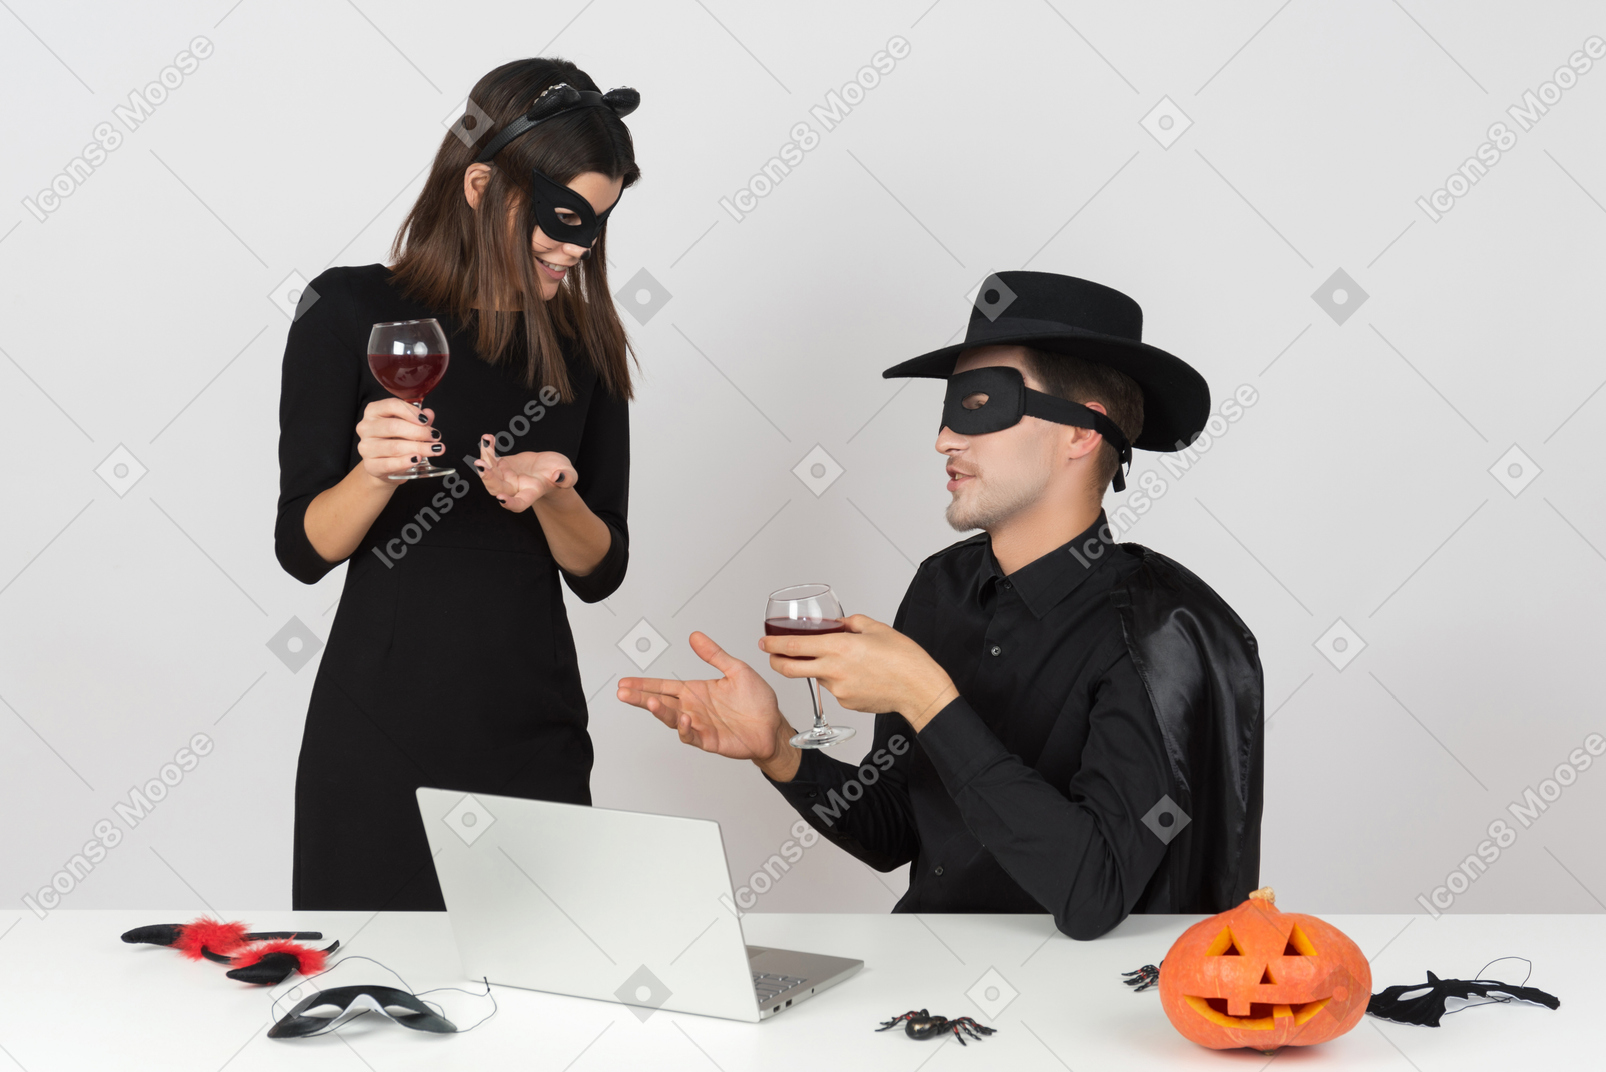 Chatting with the colleague at halloween night is like this